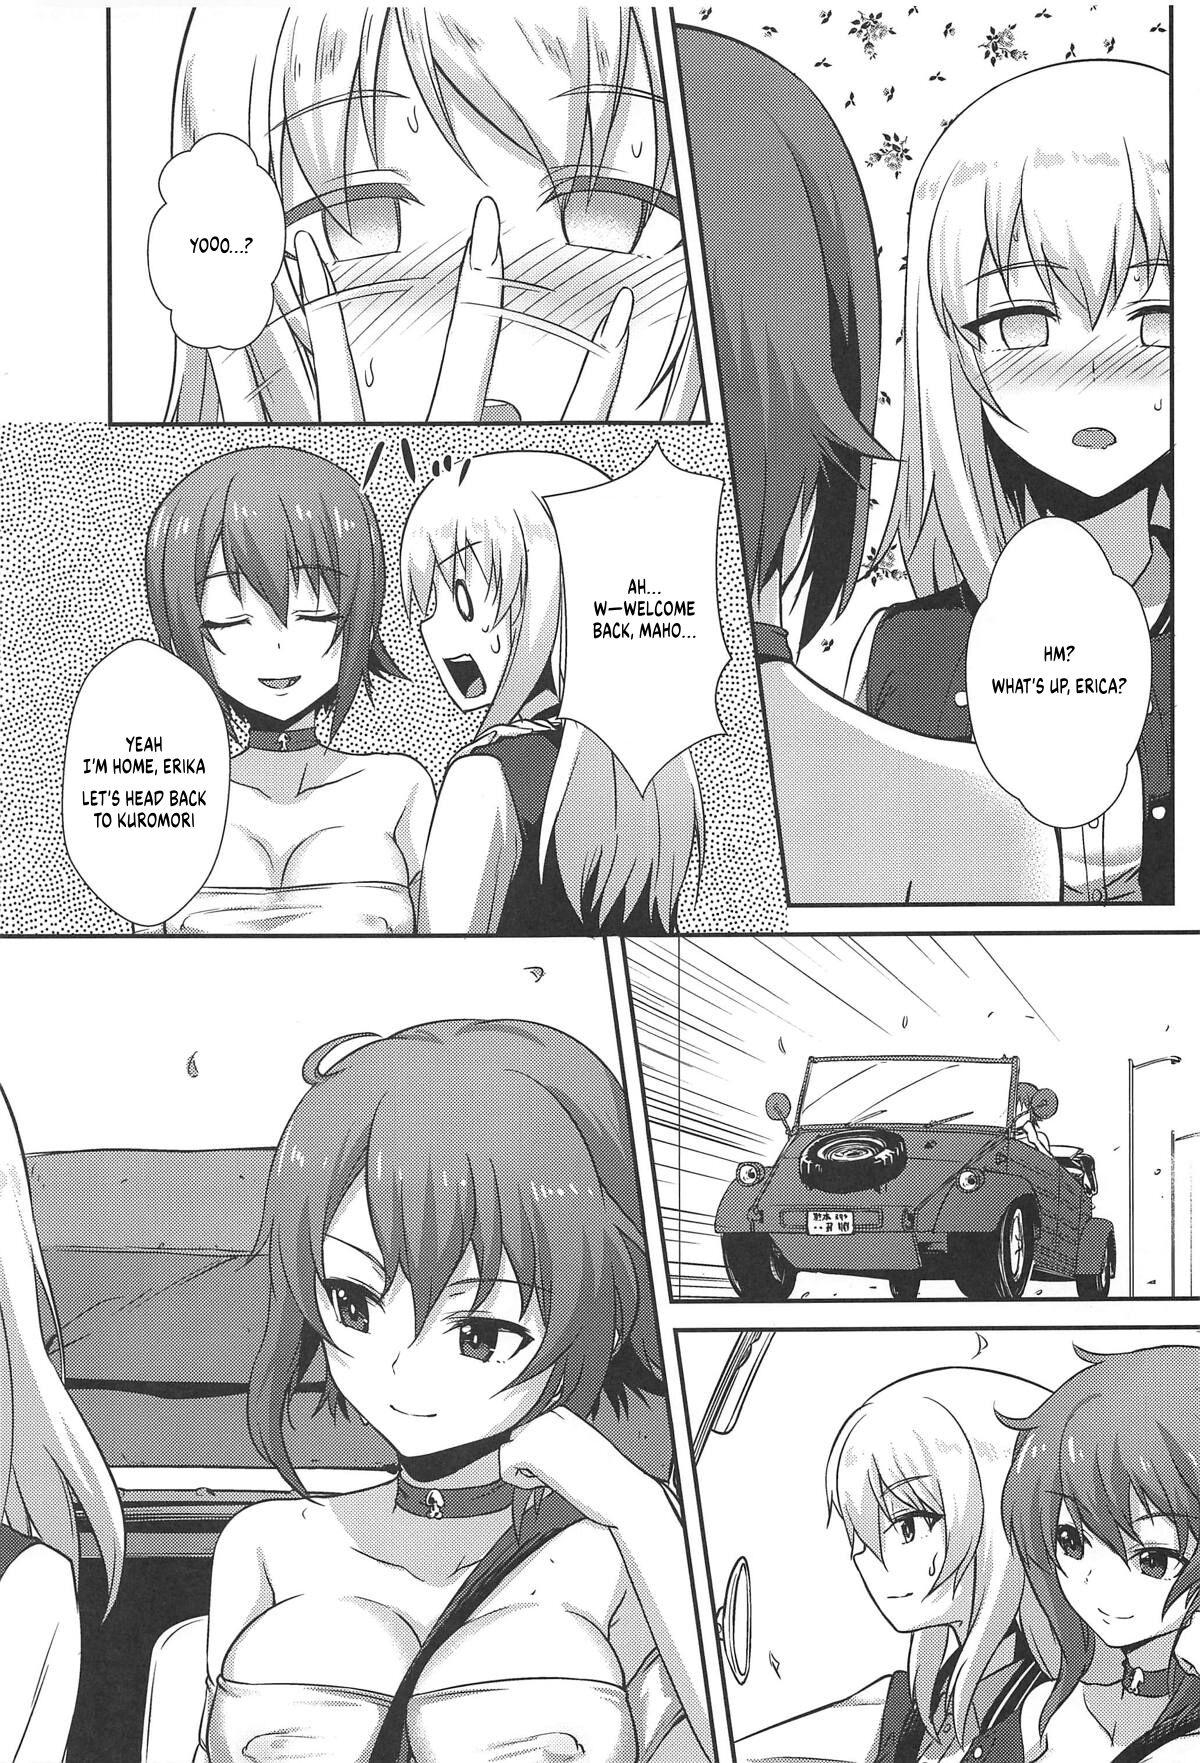 Hindi The Way How a Matriarch is Brought Up - Maho's Case, Bottom - Girls und panzer Porra - Page 7